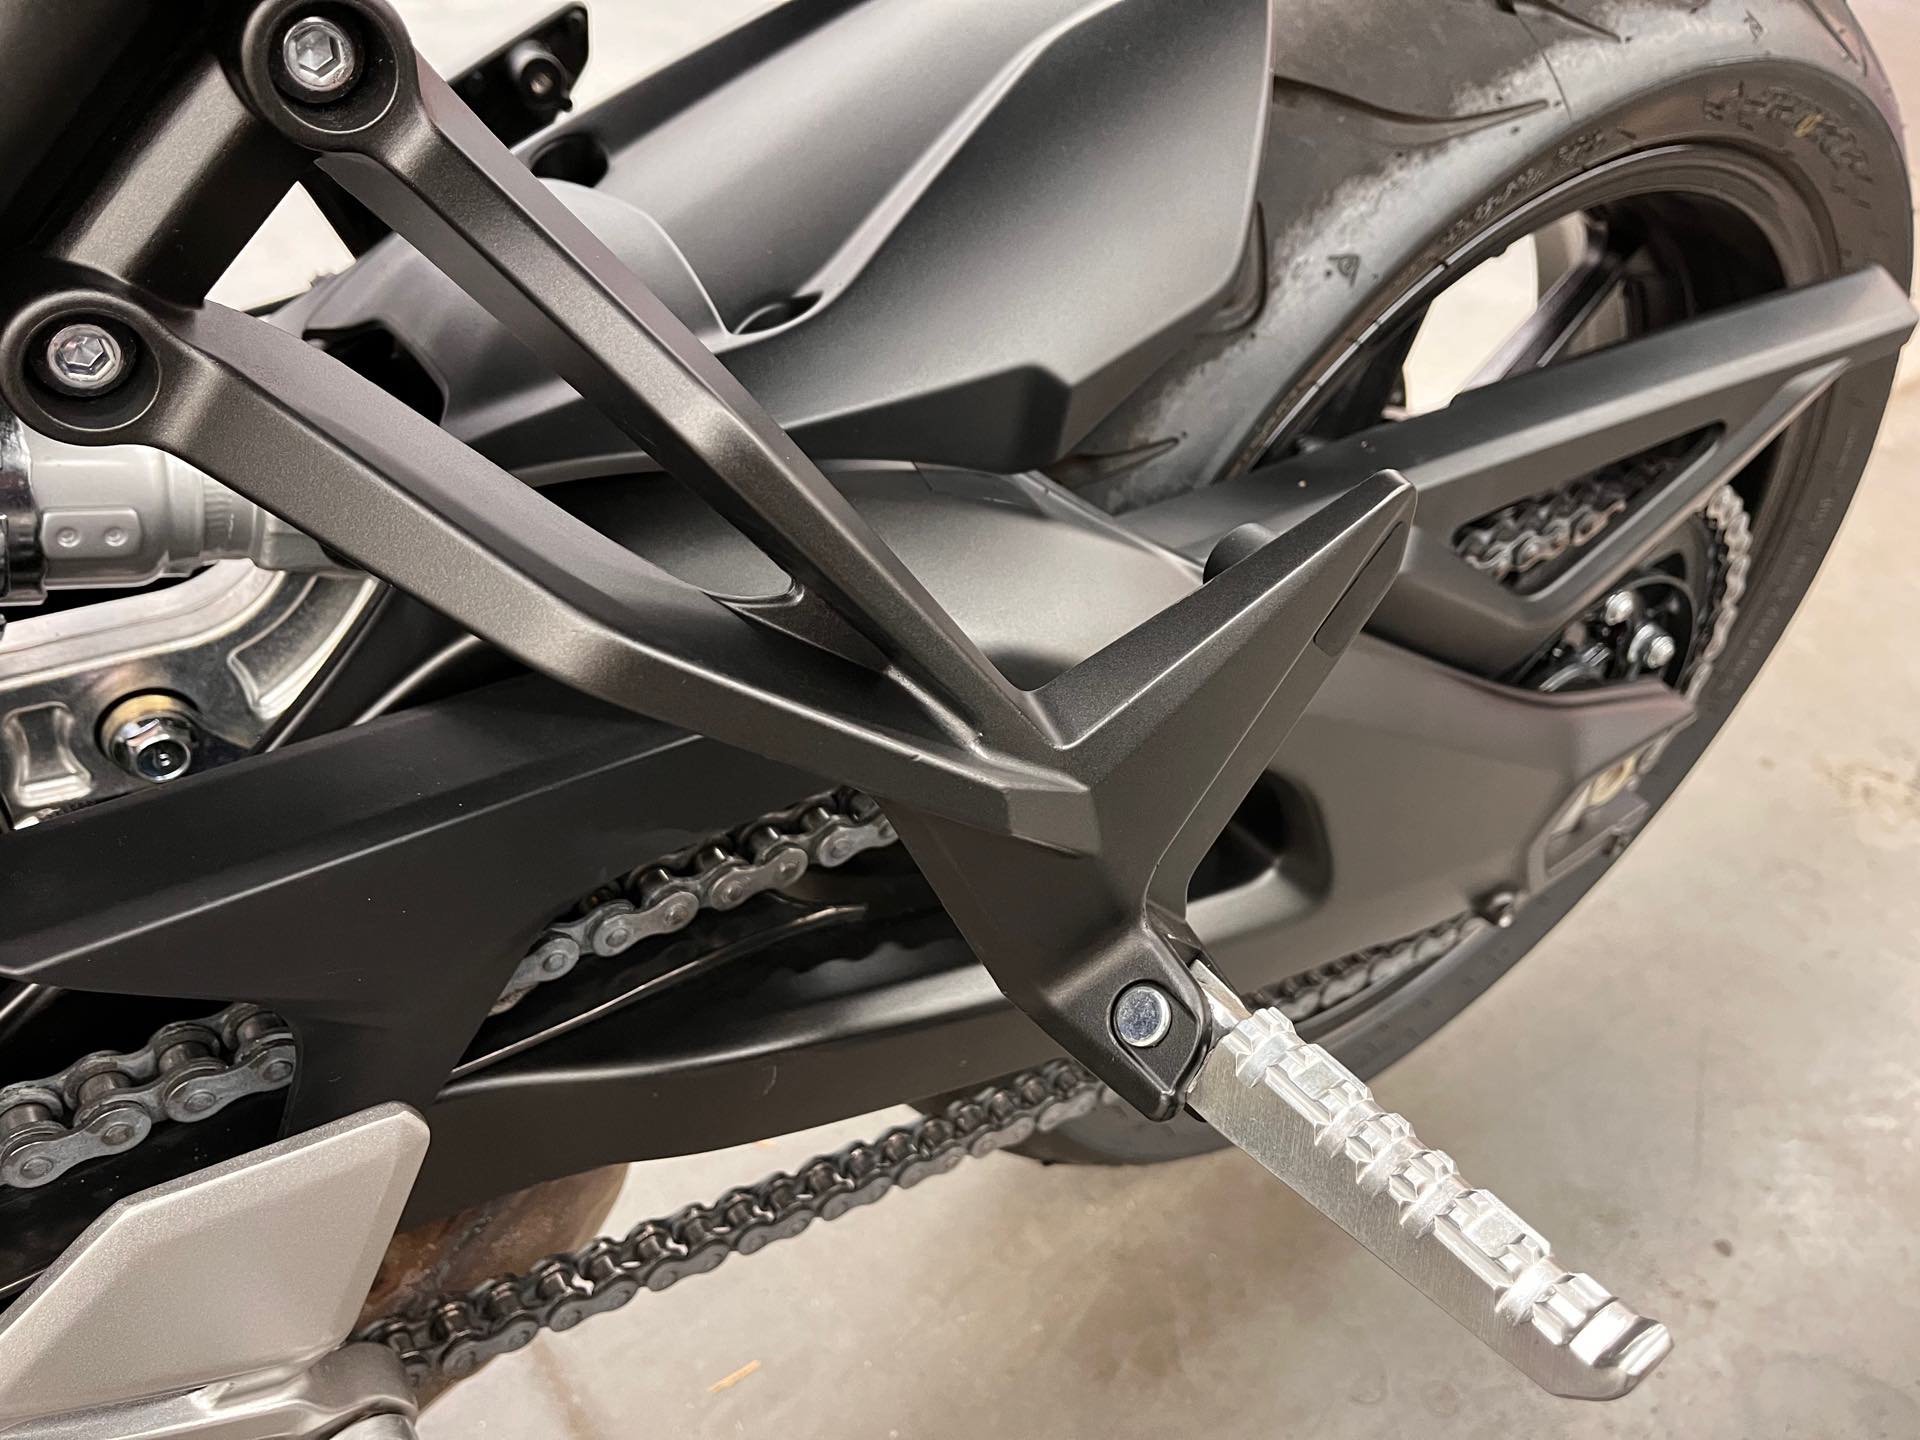 2019 Yamaha Tracer 900 at Aces Motorcycles - Denver